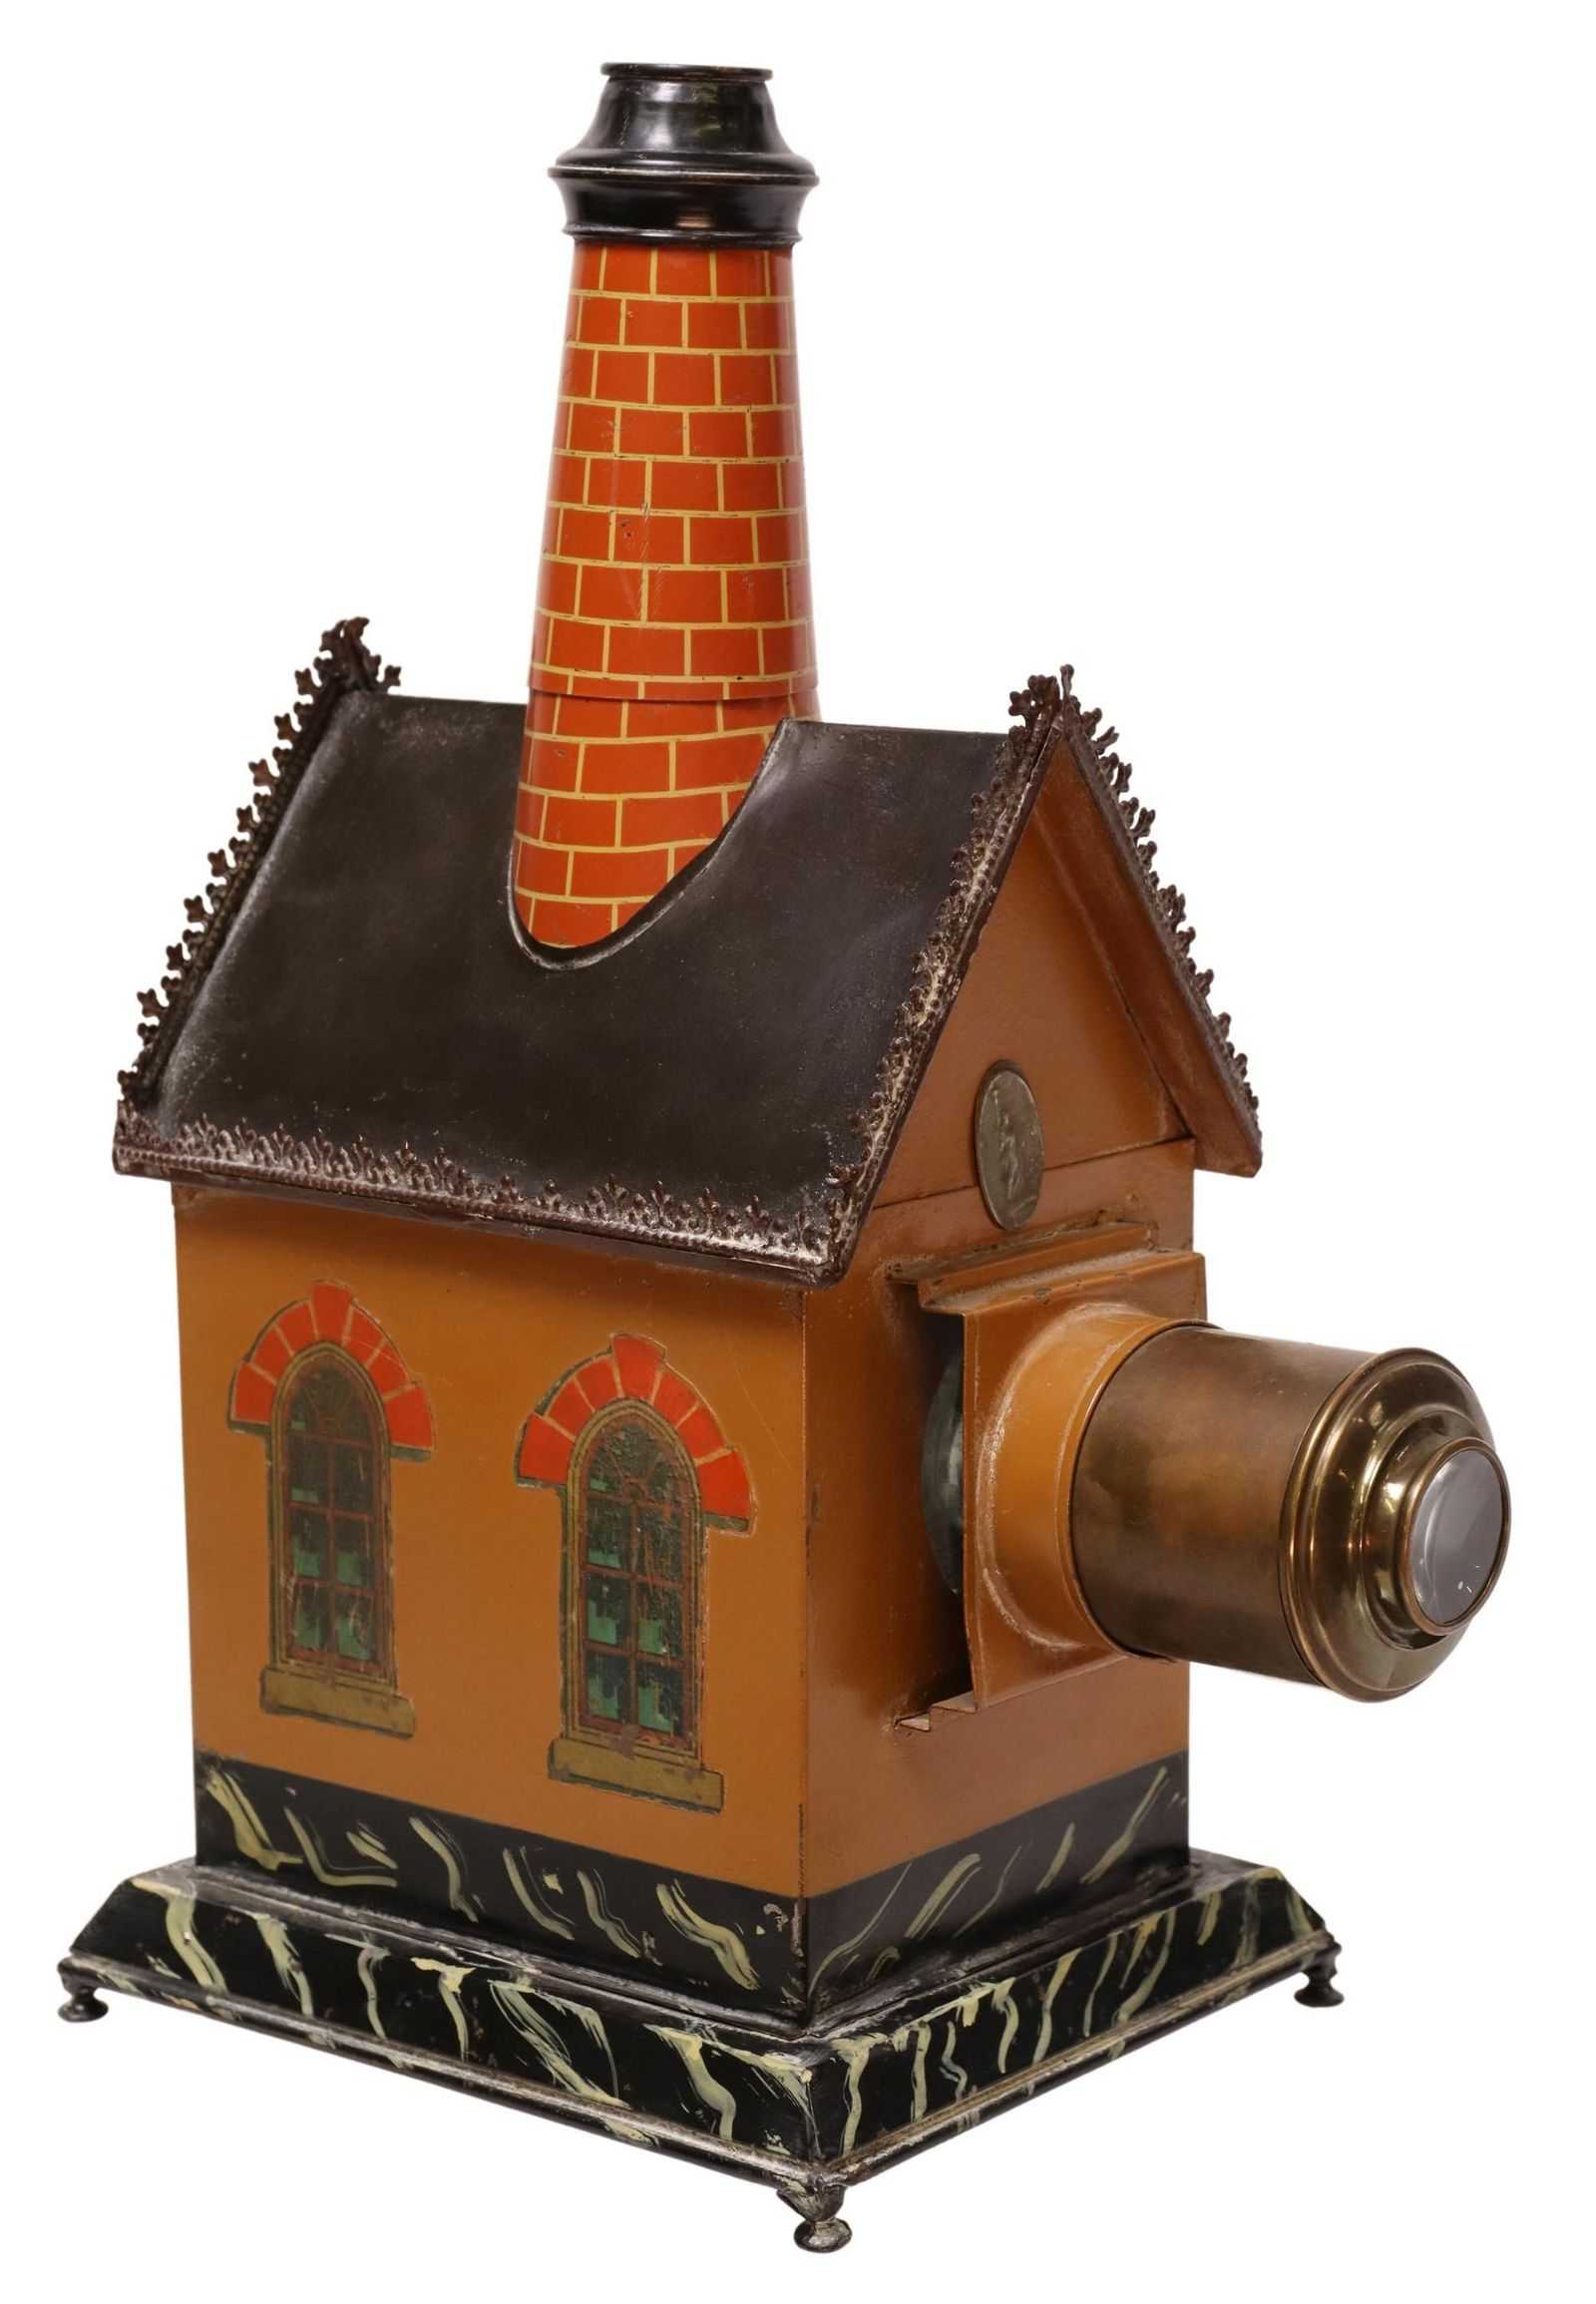 Die Fabrik (The Factory), a circa-1895 tinplate lantern by Georges Carette, estimated at $1,500-$2,500 at Austin Auction Gallery.